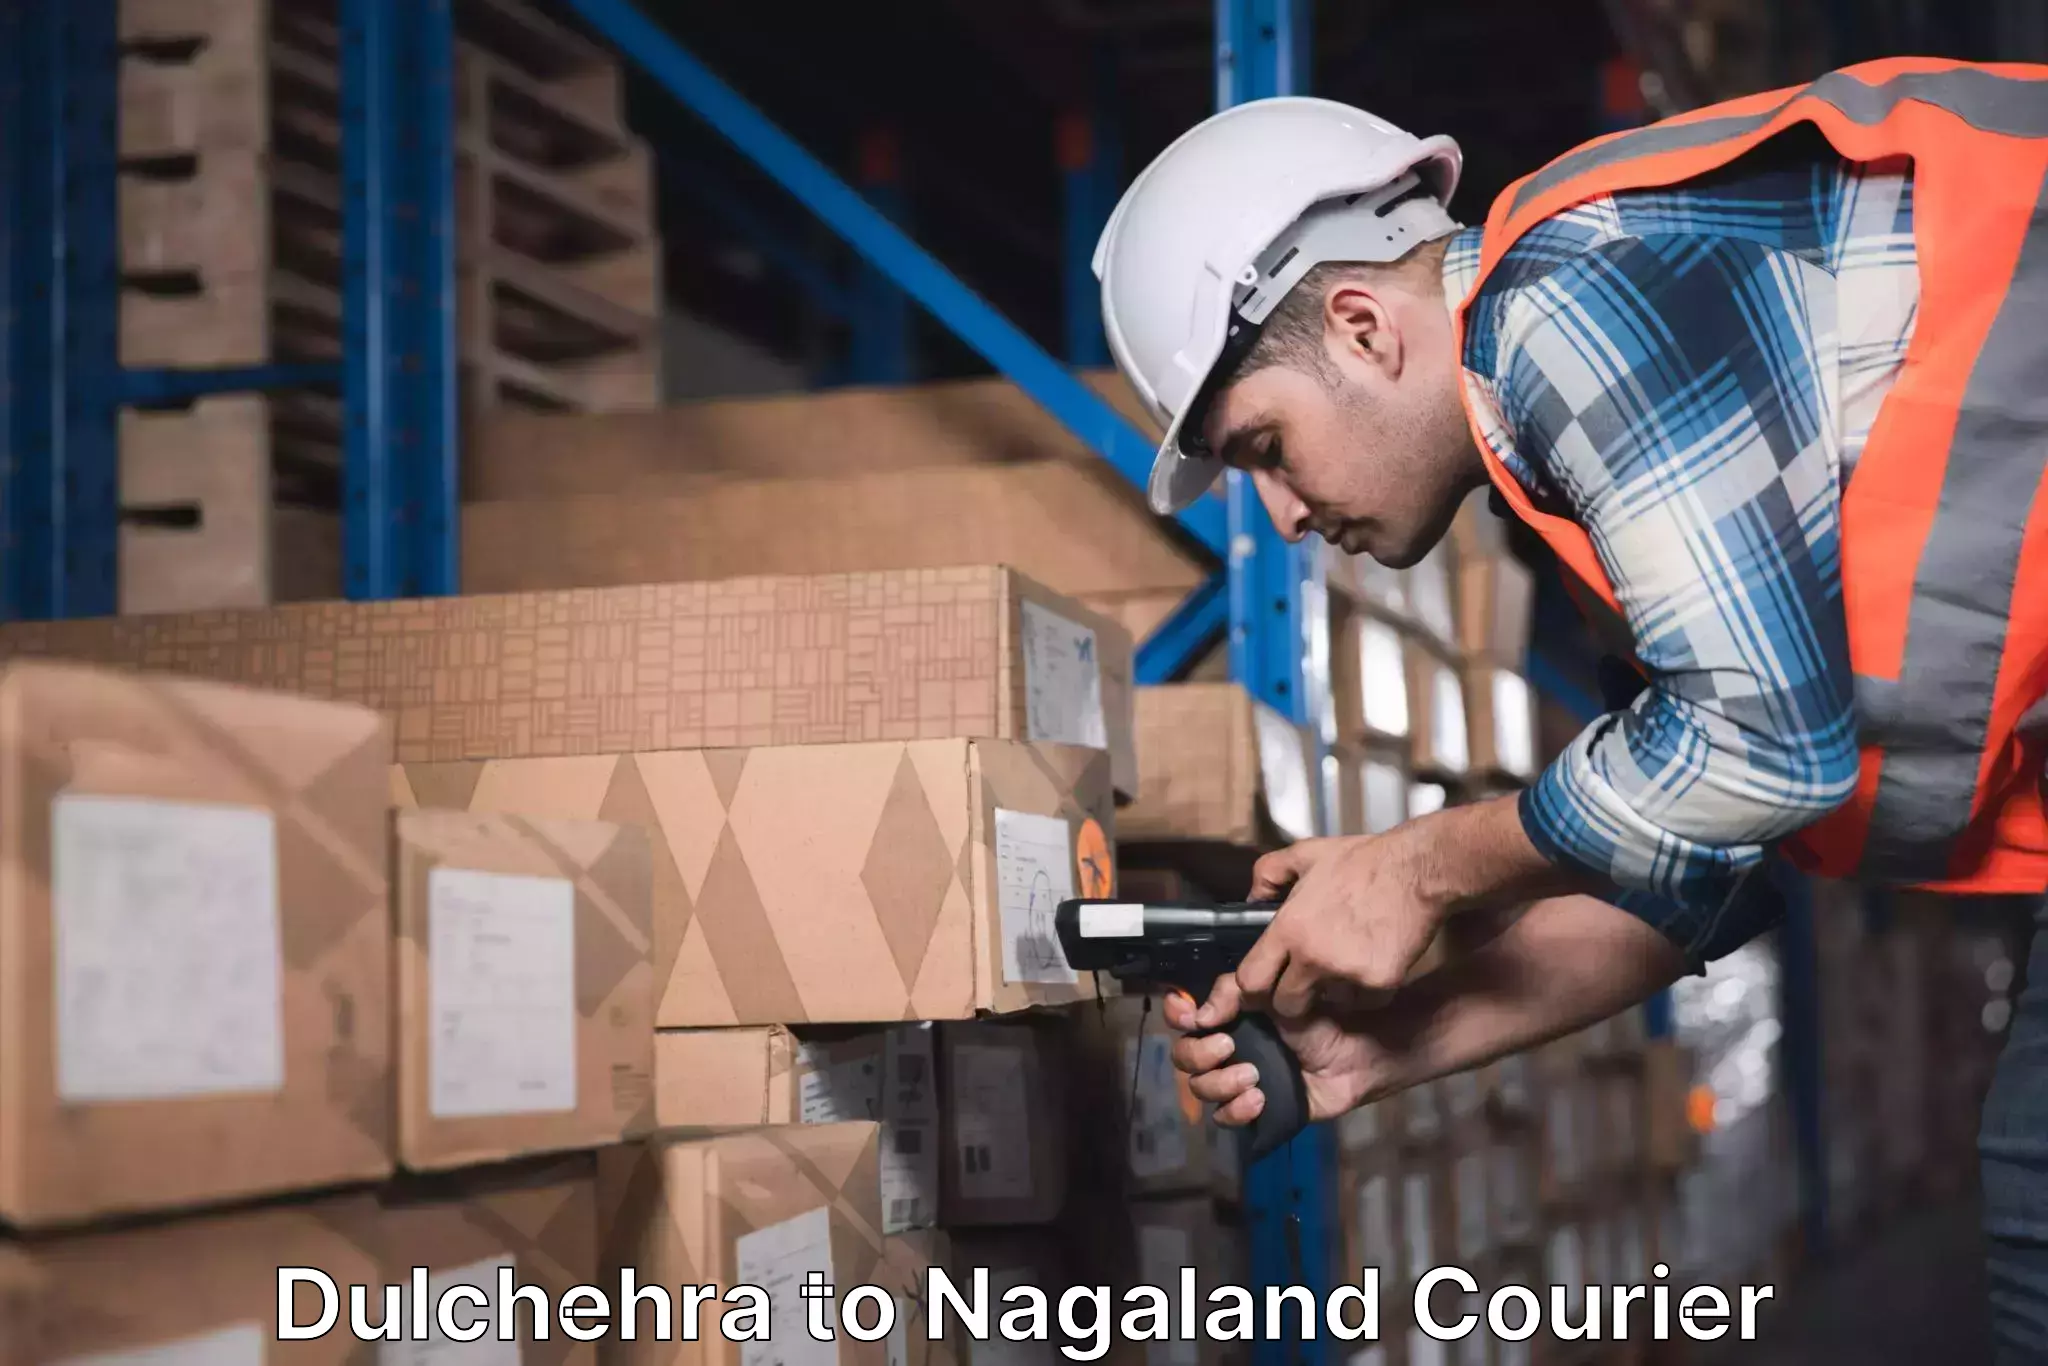 Courier service partnerships Dulchehra to Nagaland